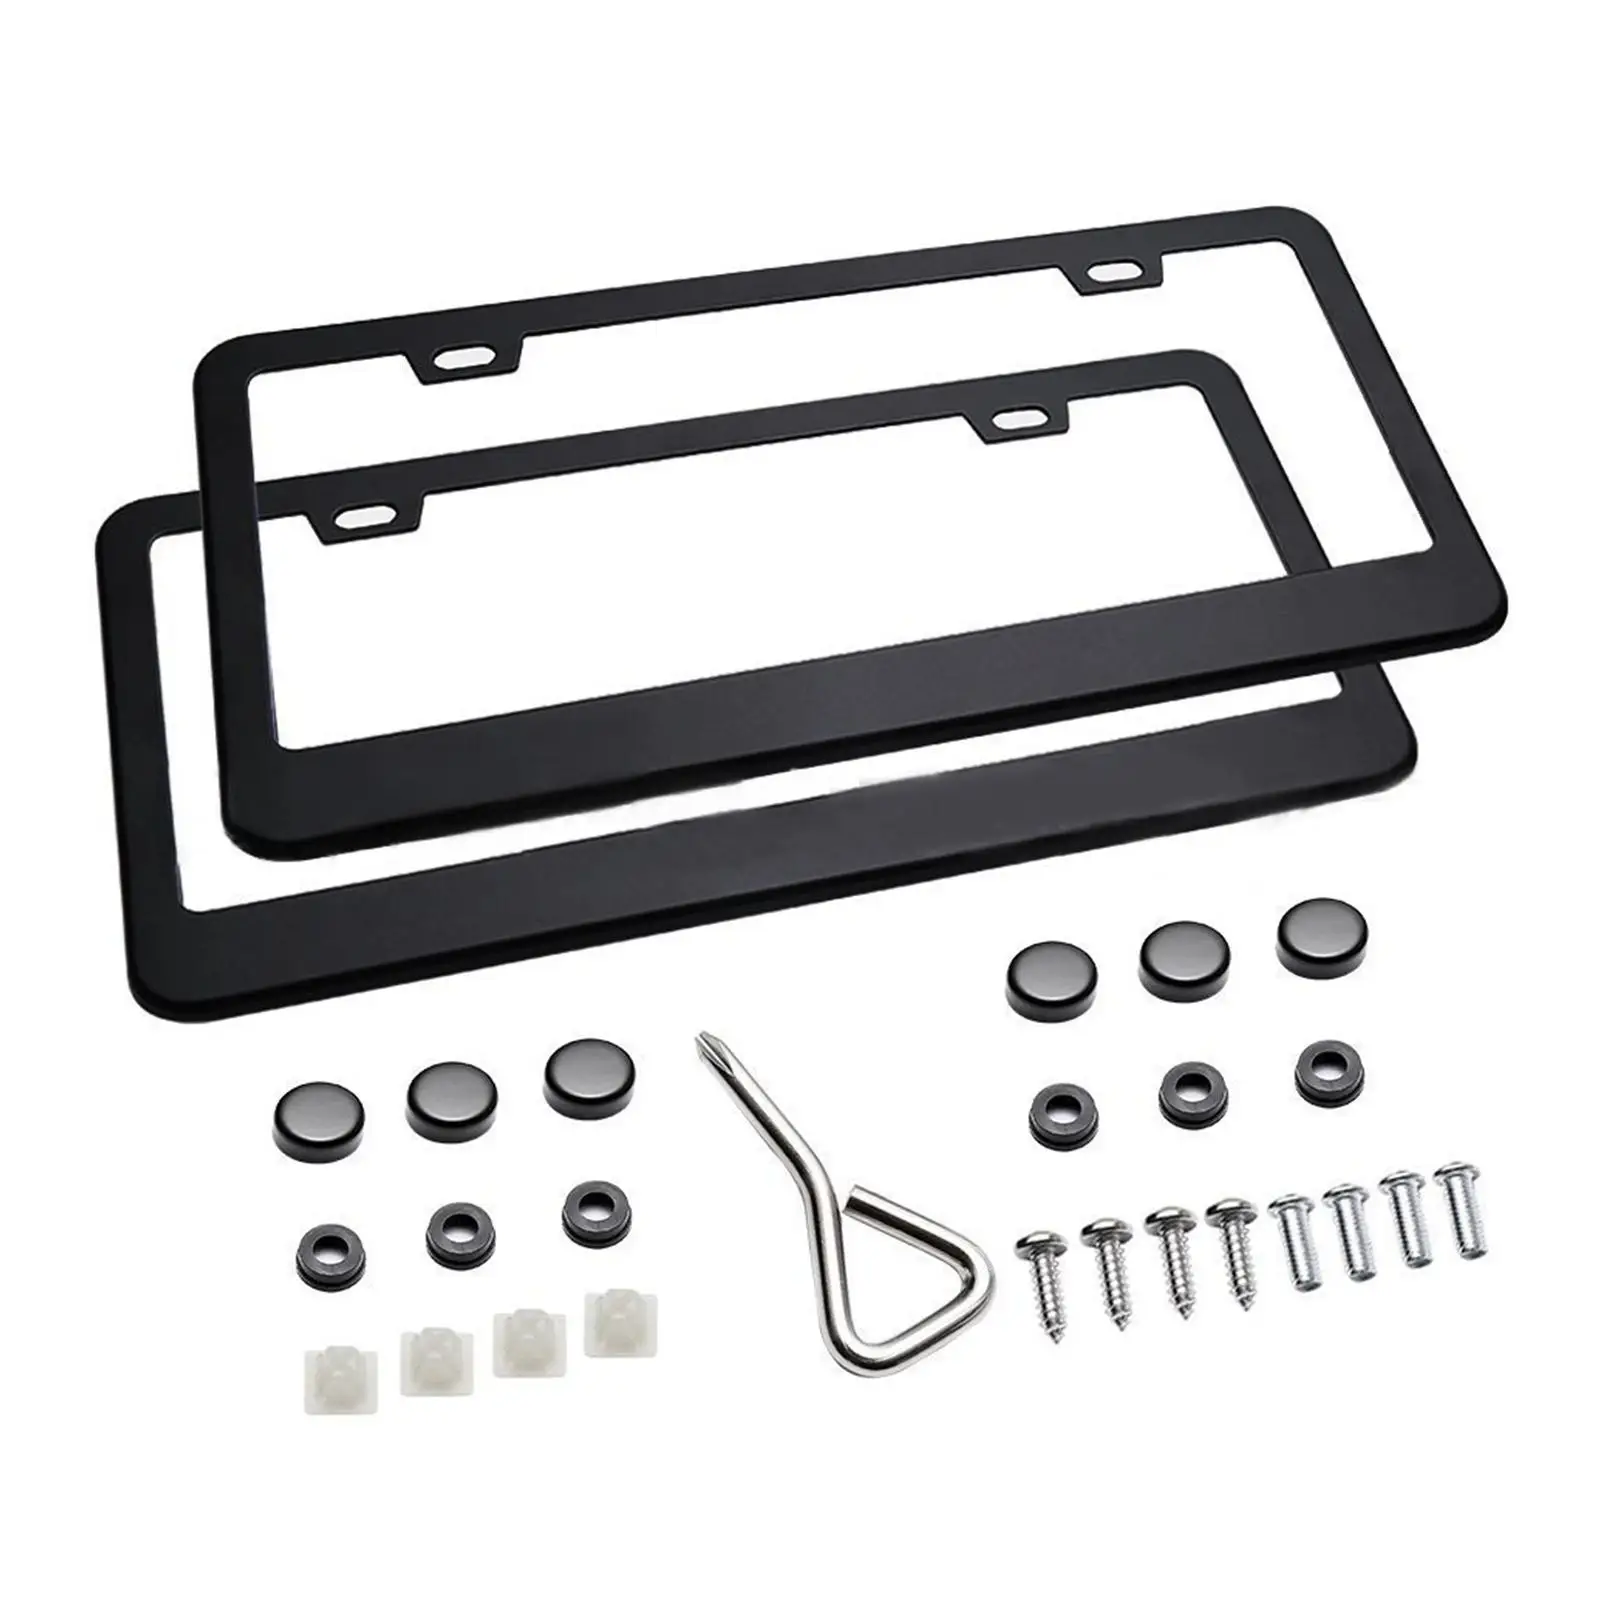 2 Pieces Front Rear License Plate Frame Professional Protection Automotive Decoration High Performance License Plate Bracket